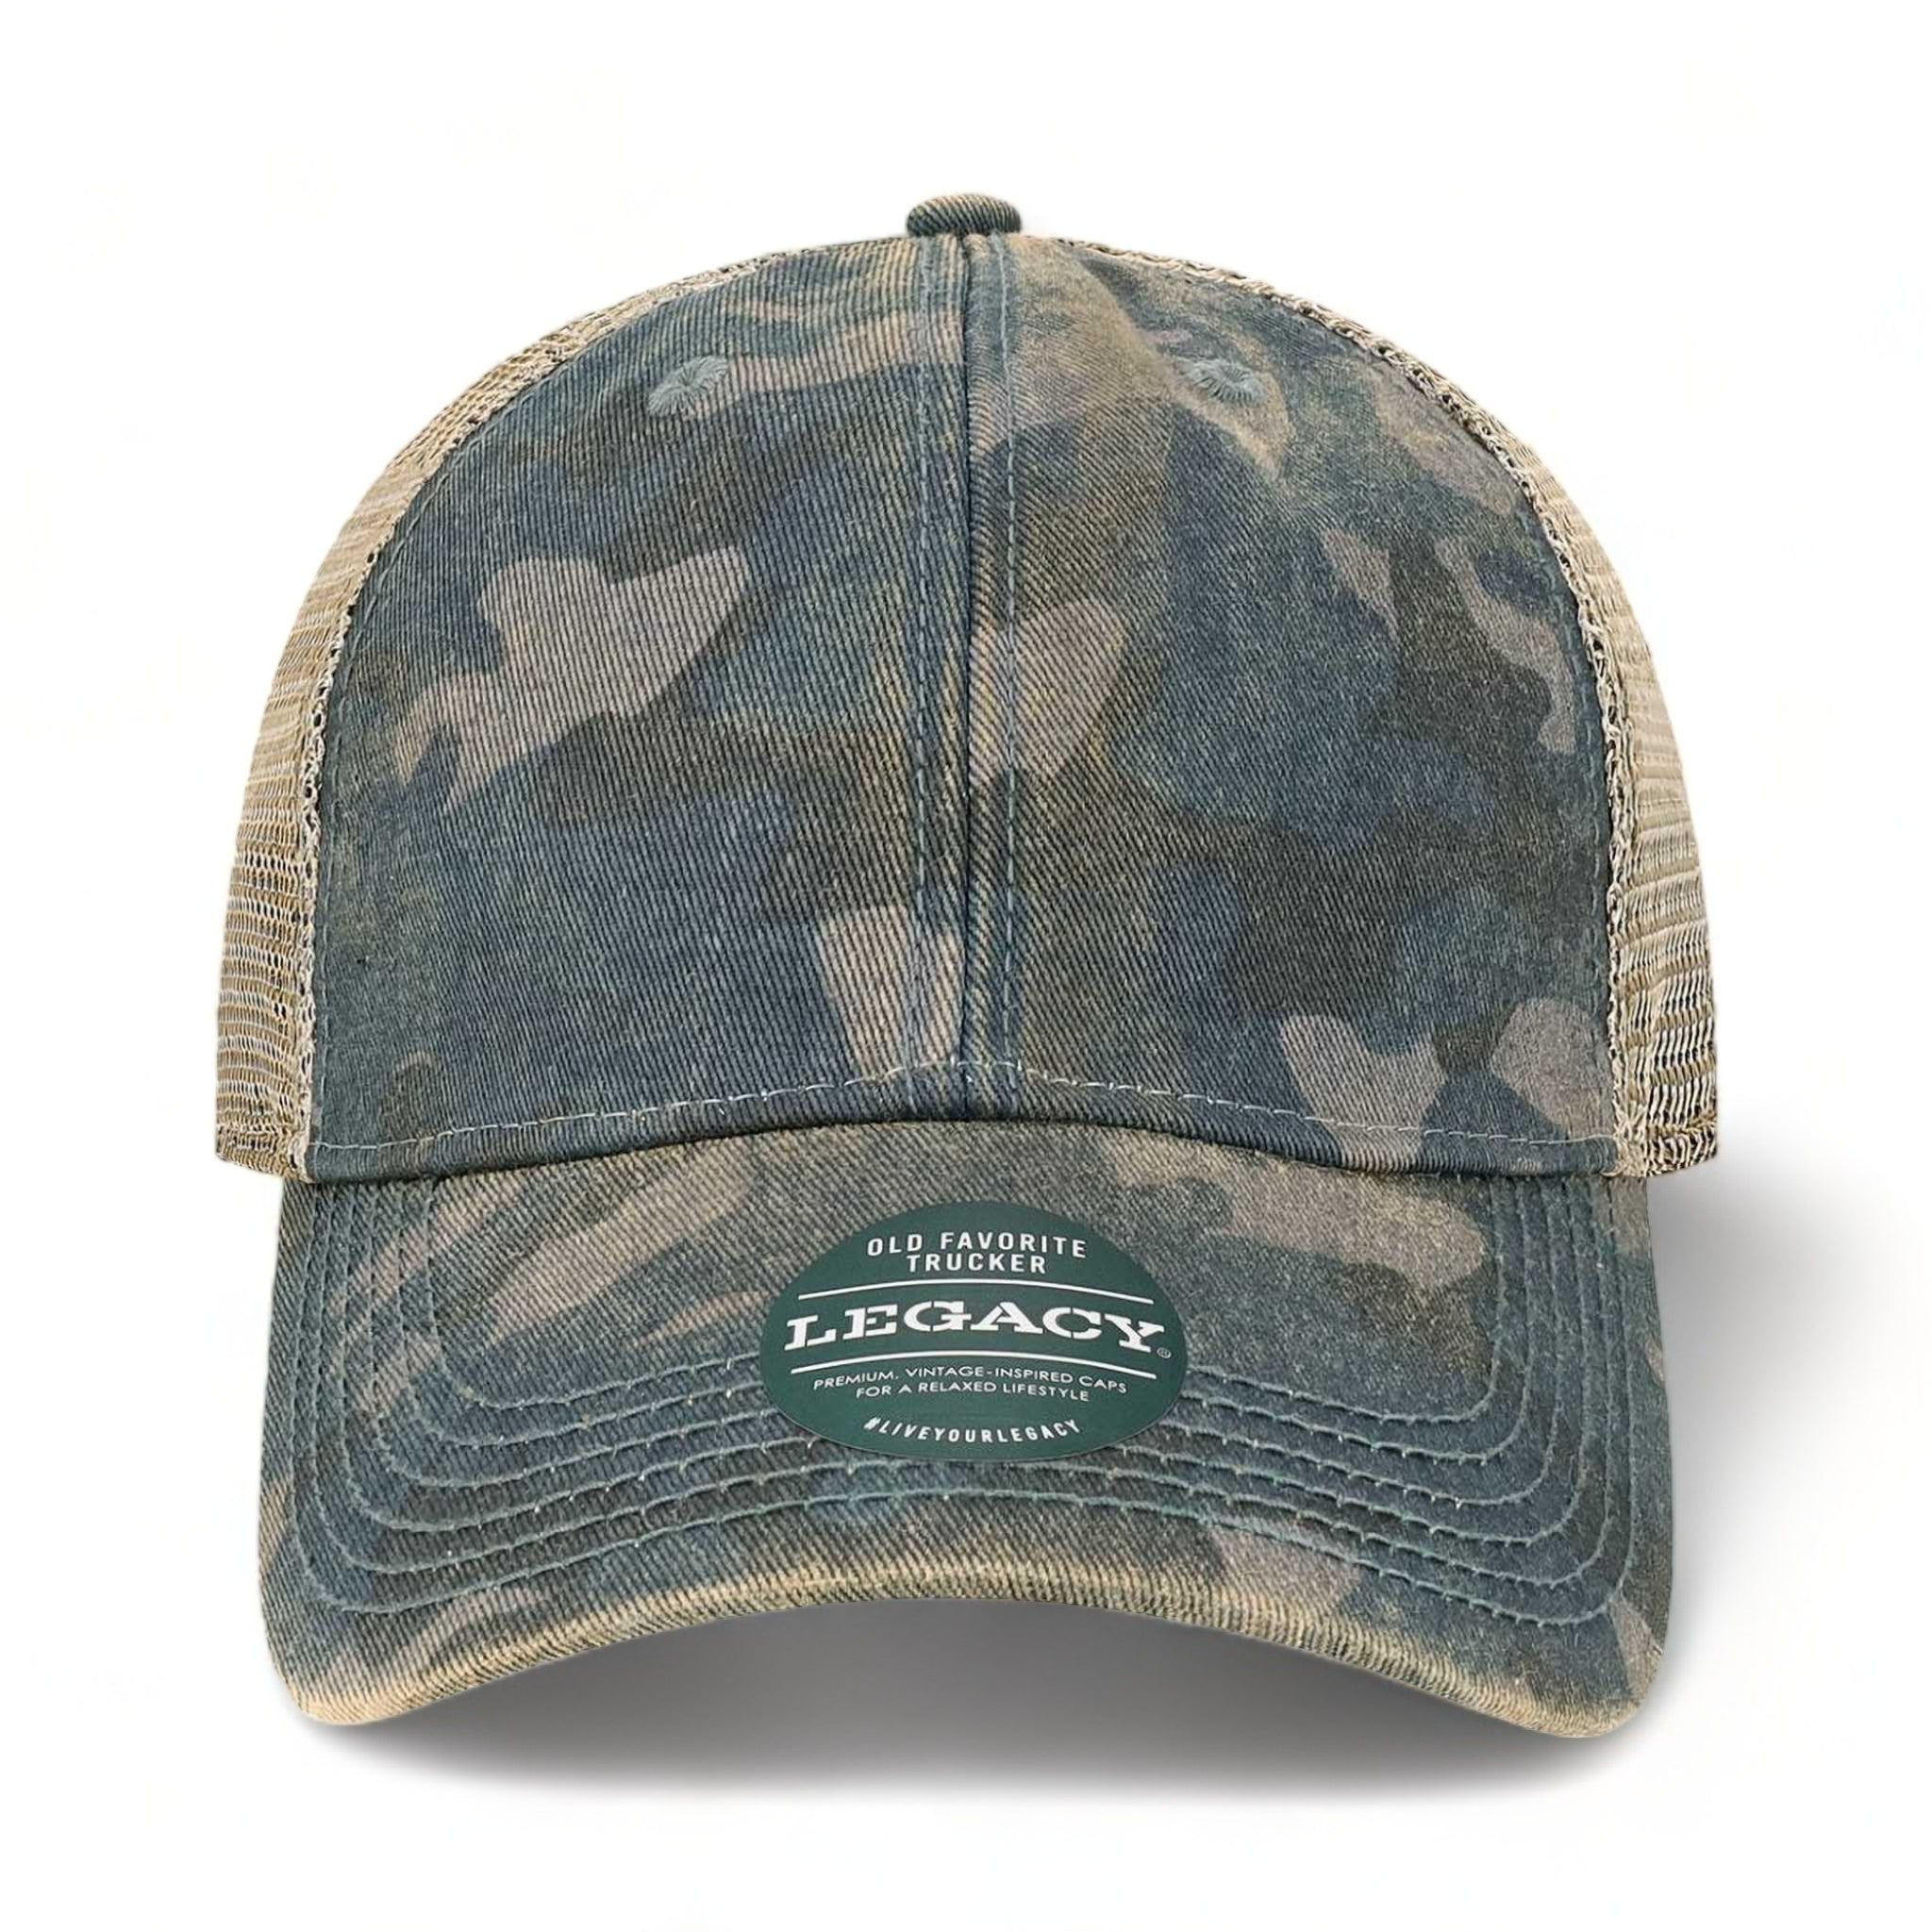 Front view of LEGACY OFA custom hat in blue camo and java